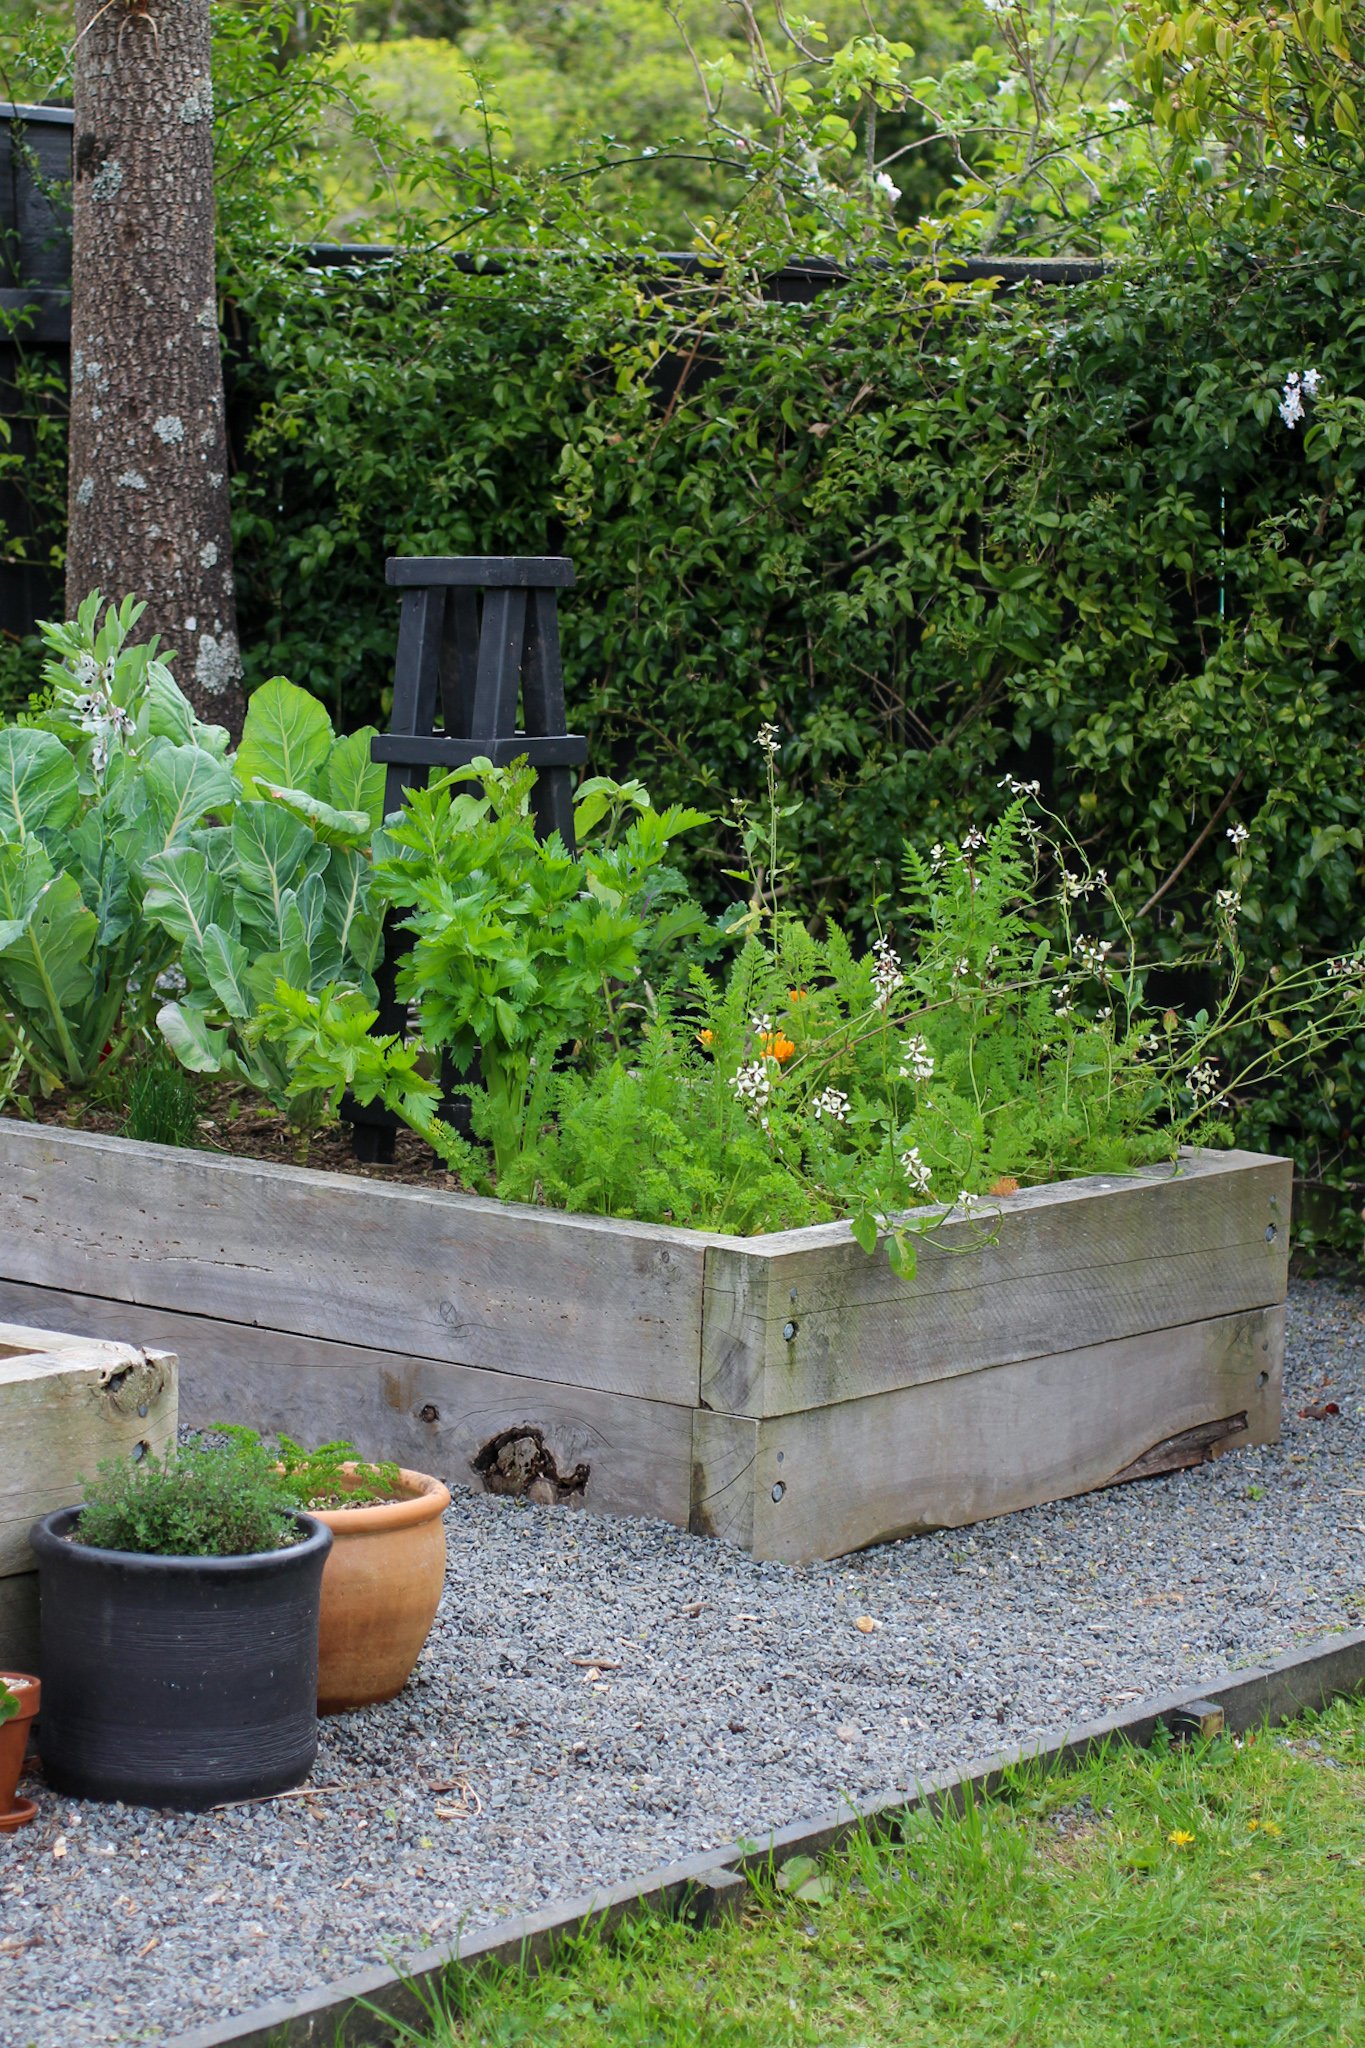 How to fill a raised garden bed – expert tips to get the ideal blend of soil and materials